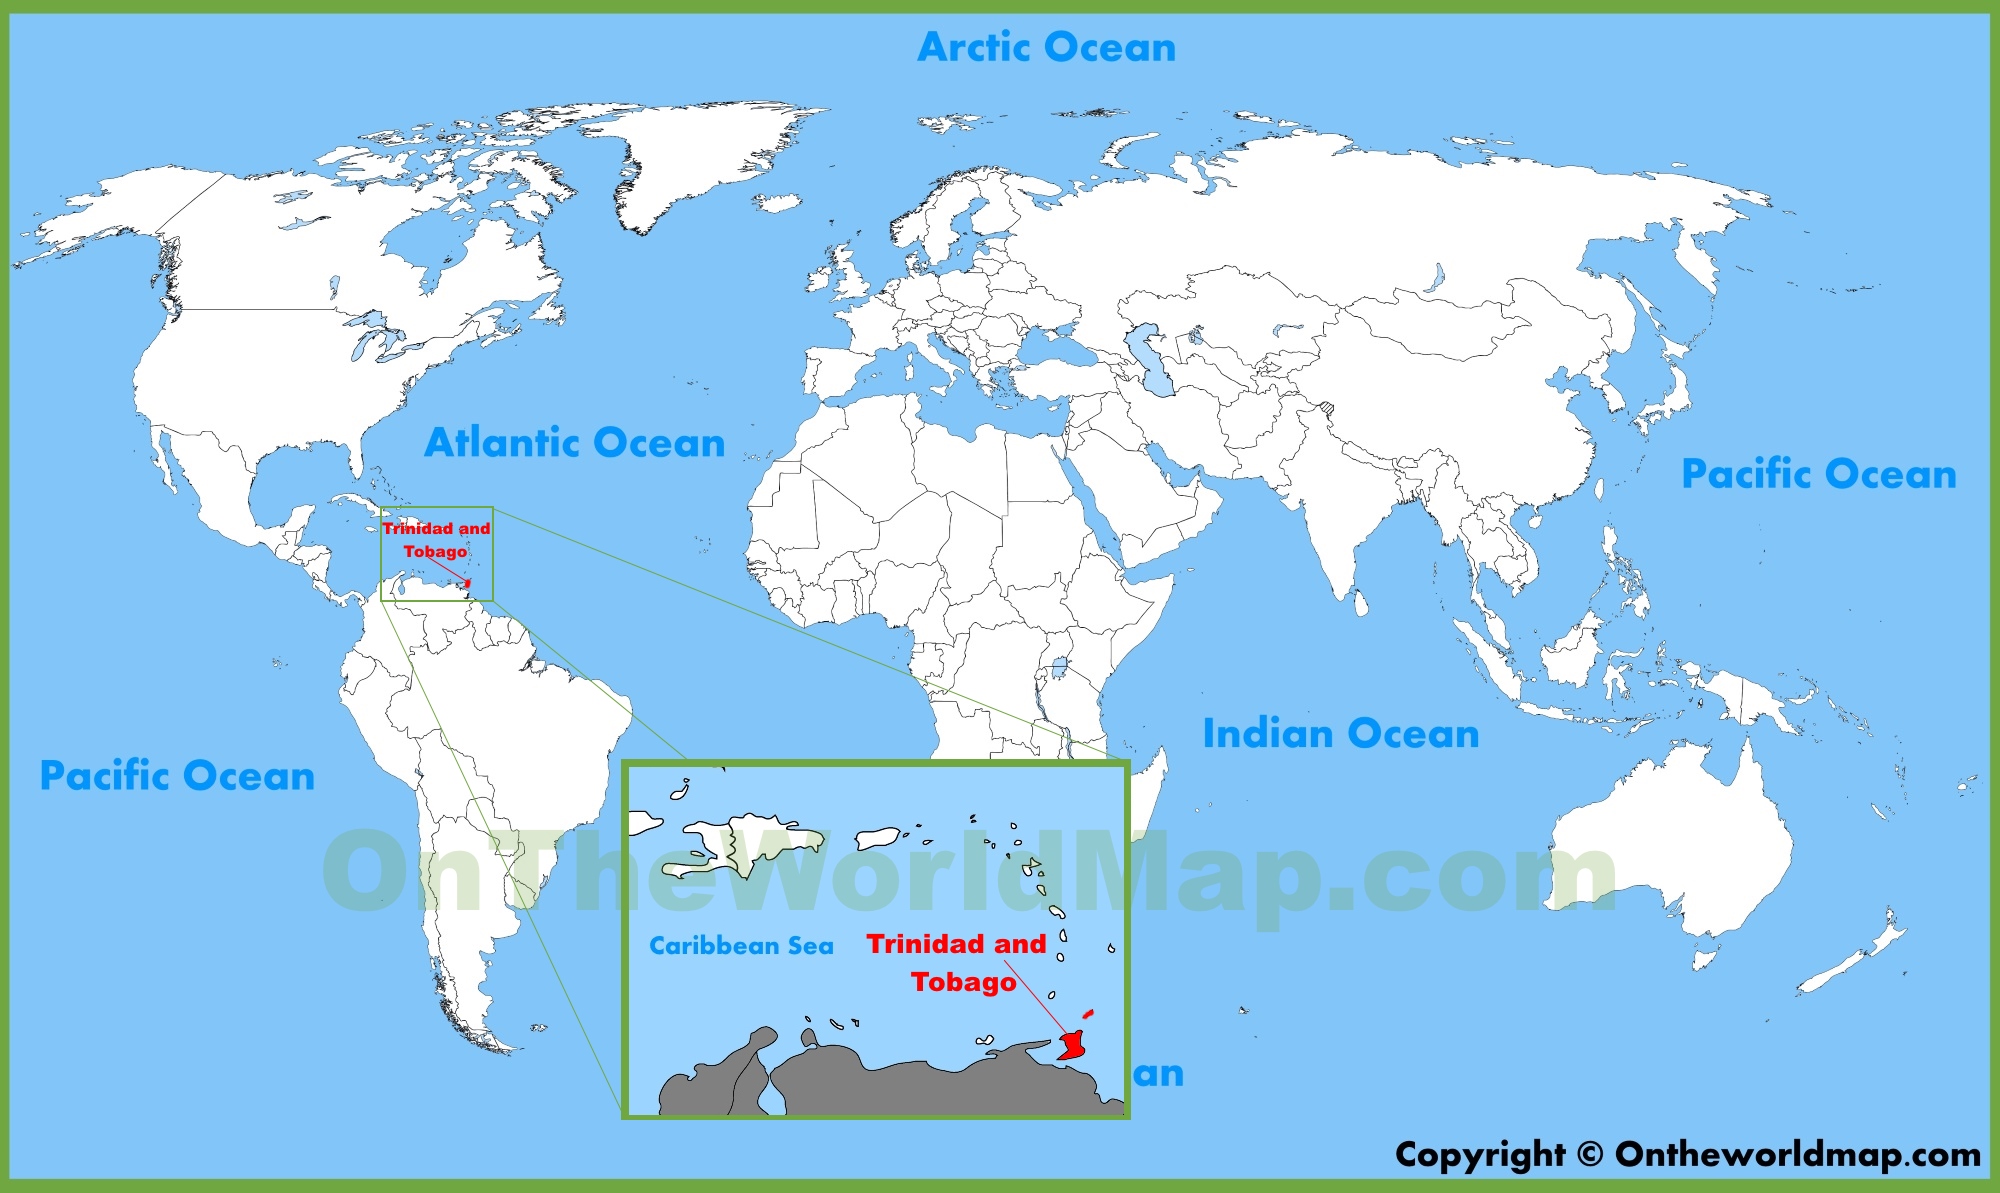 where is trinidad and tobago located on the world map Trinidad And Tobago Location On The World Map where is trinidad and tobago located on the world map